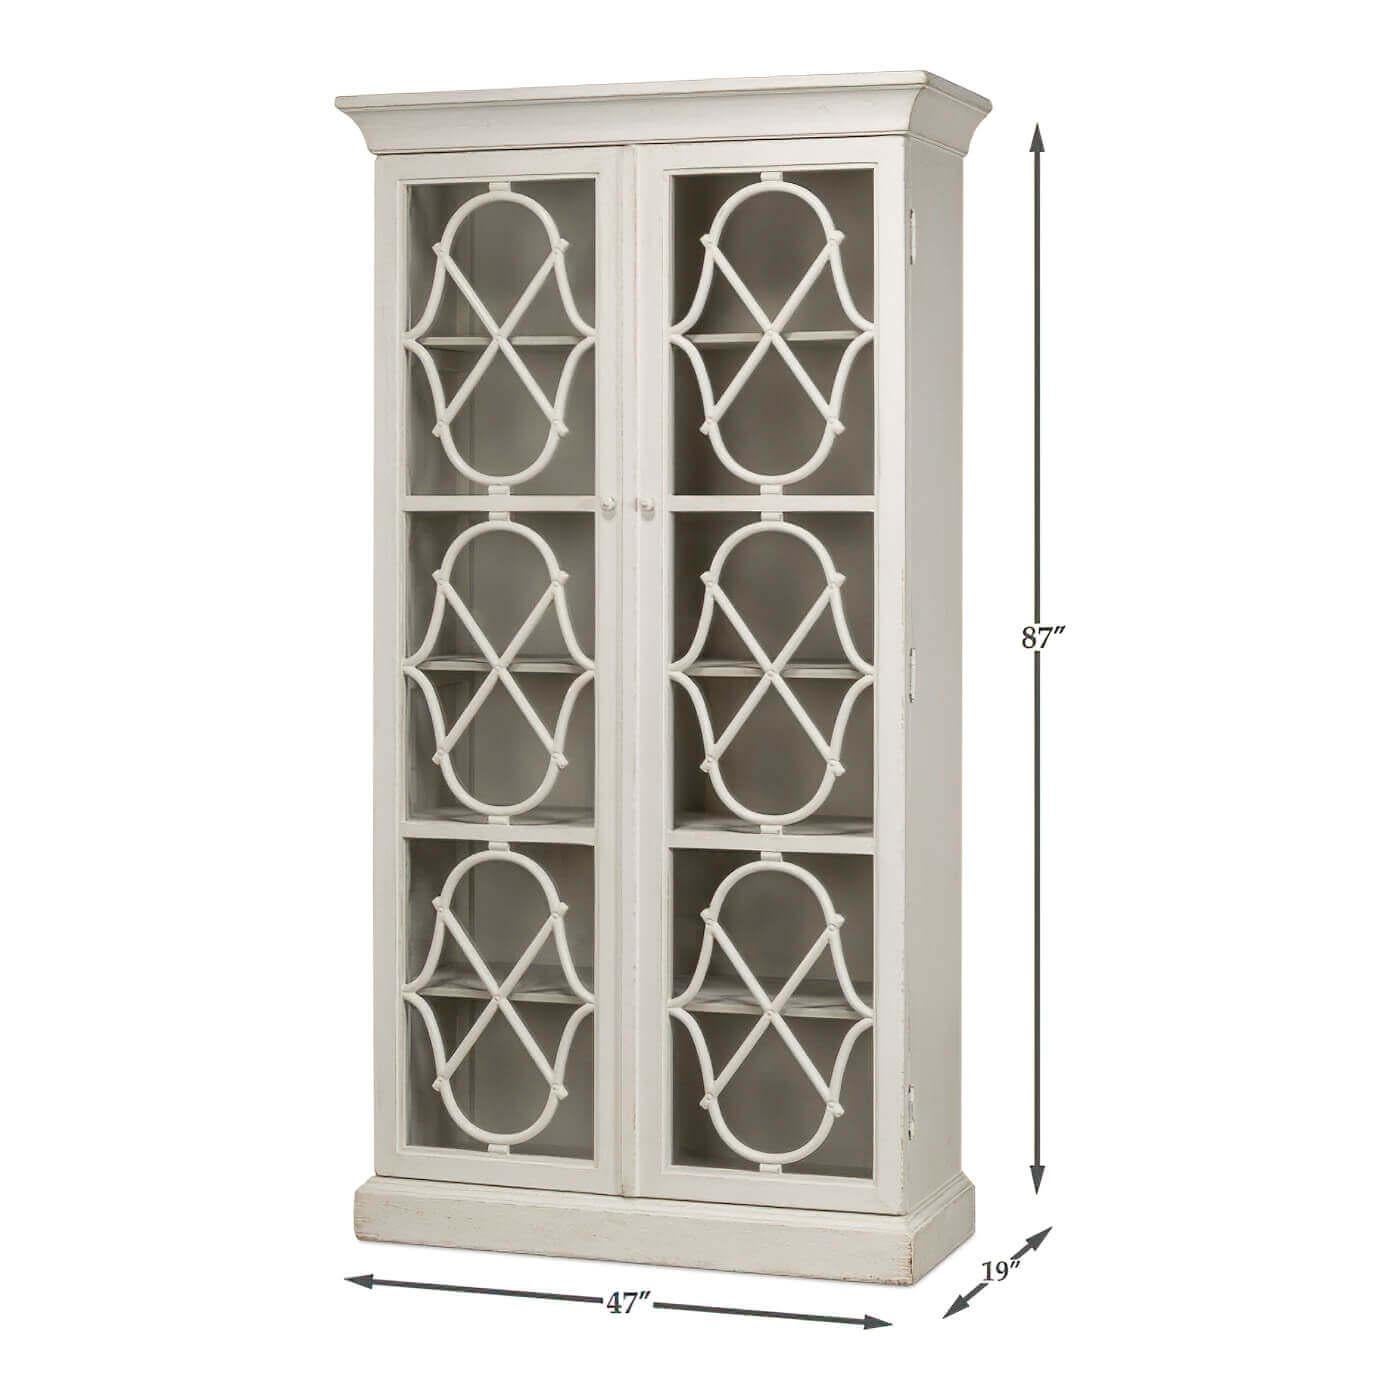 This tall, gracefully structured cabinet is finished in a serene antique white, exuding timeless sophistication. The striking windowpane doors, adorned with a geometric lattice design, not only add a decorative touch but also allow glimpses of your